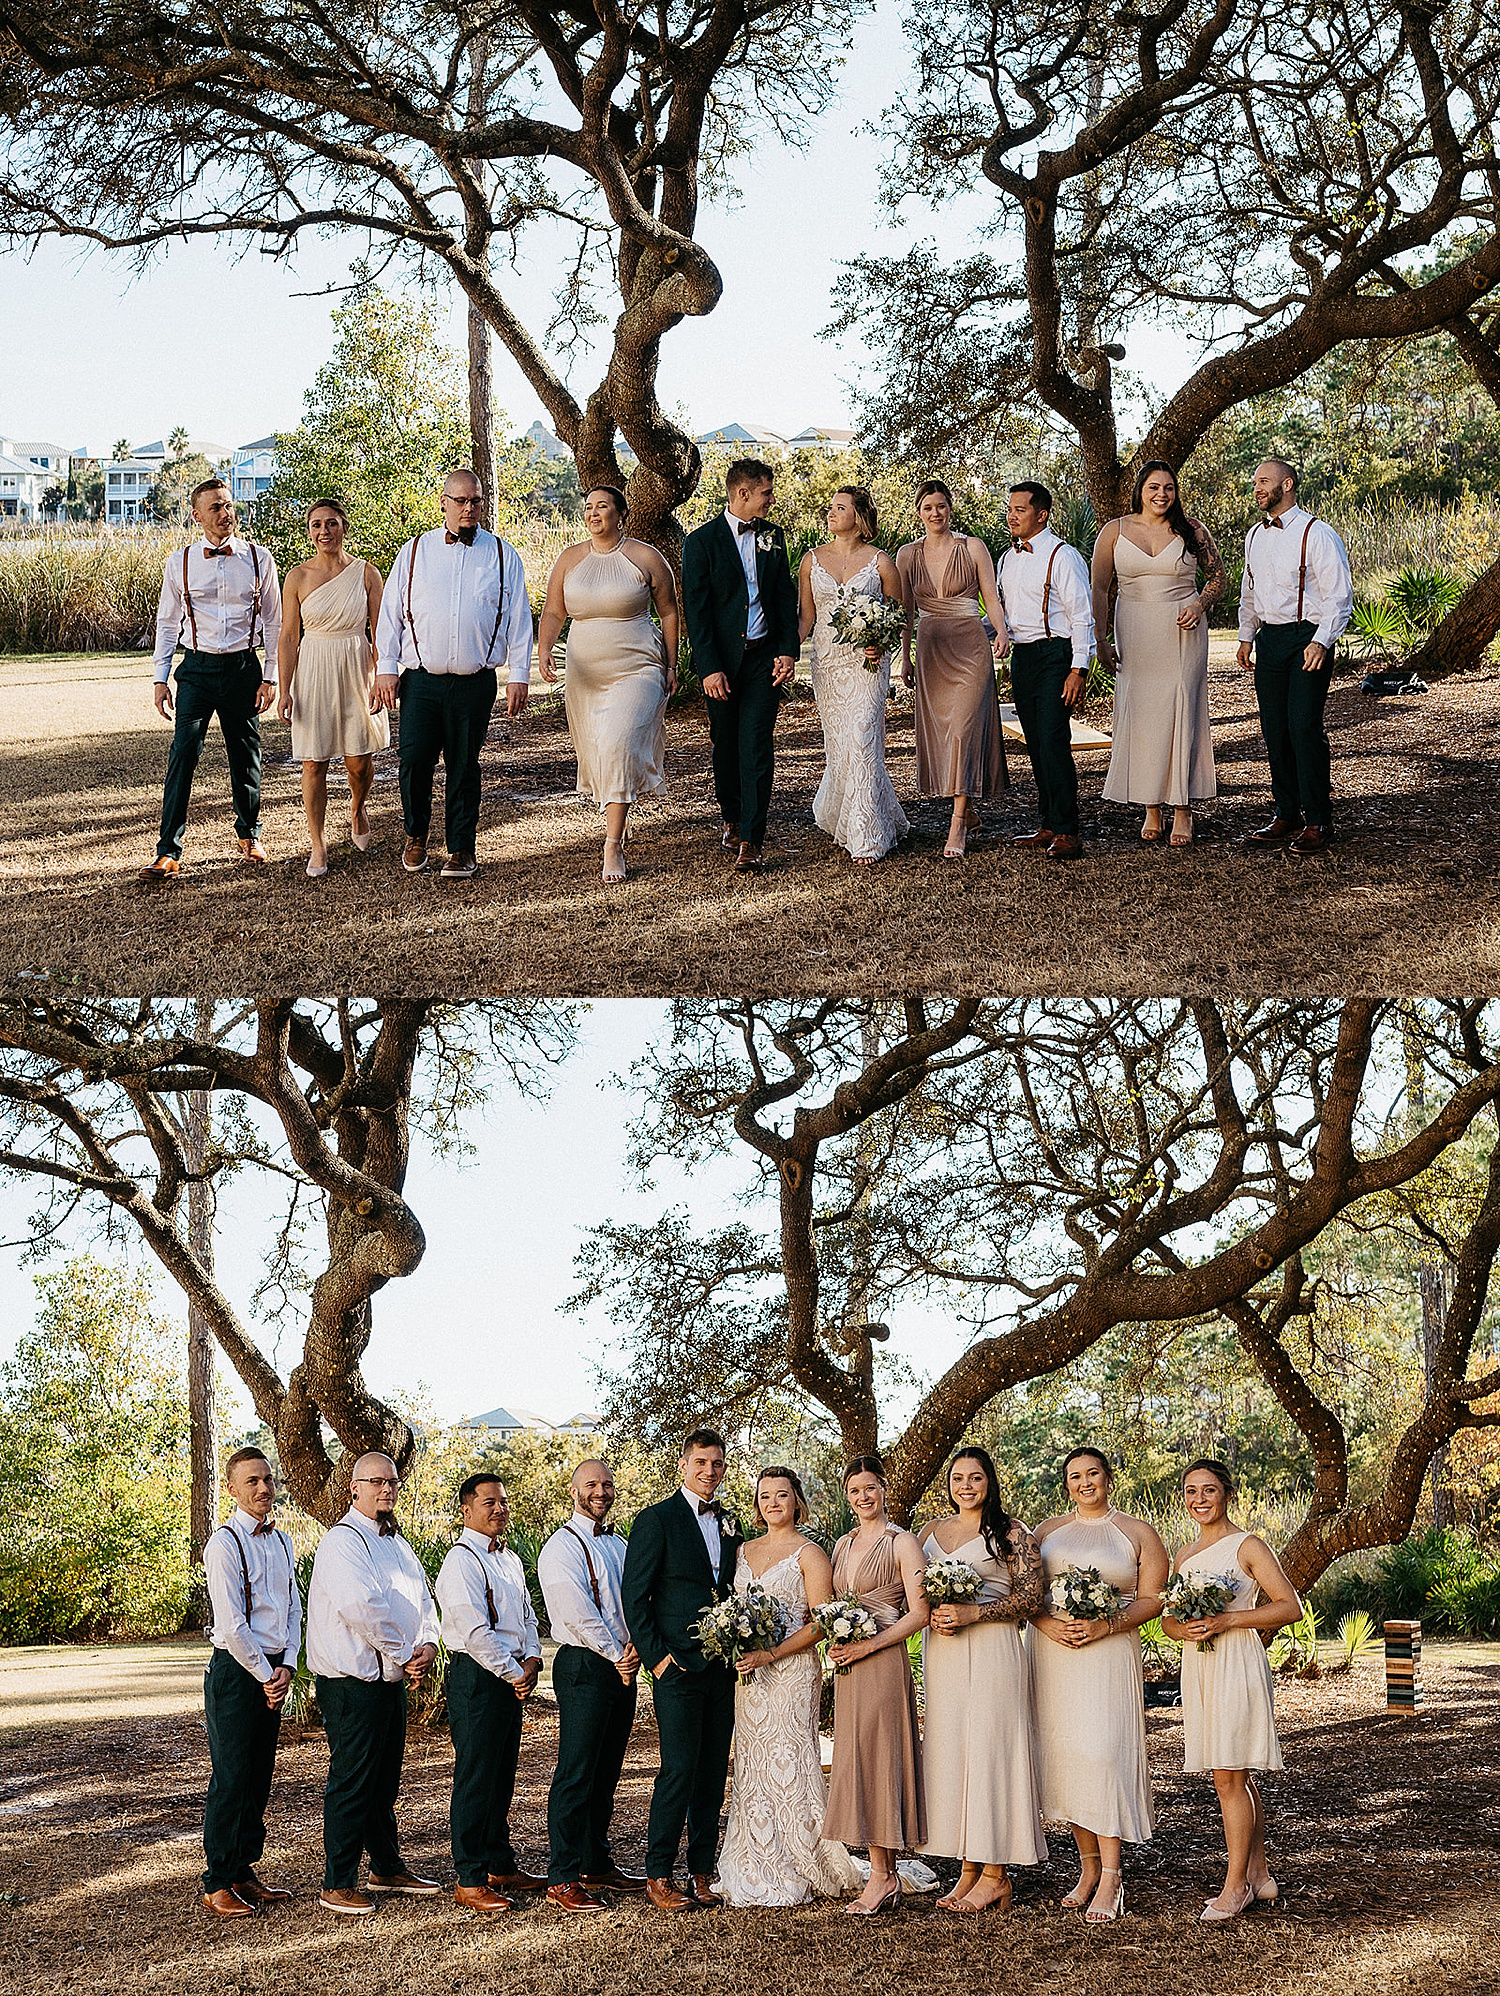 Wedding party wearing nude colored dresses and bowties with suspenders